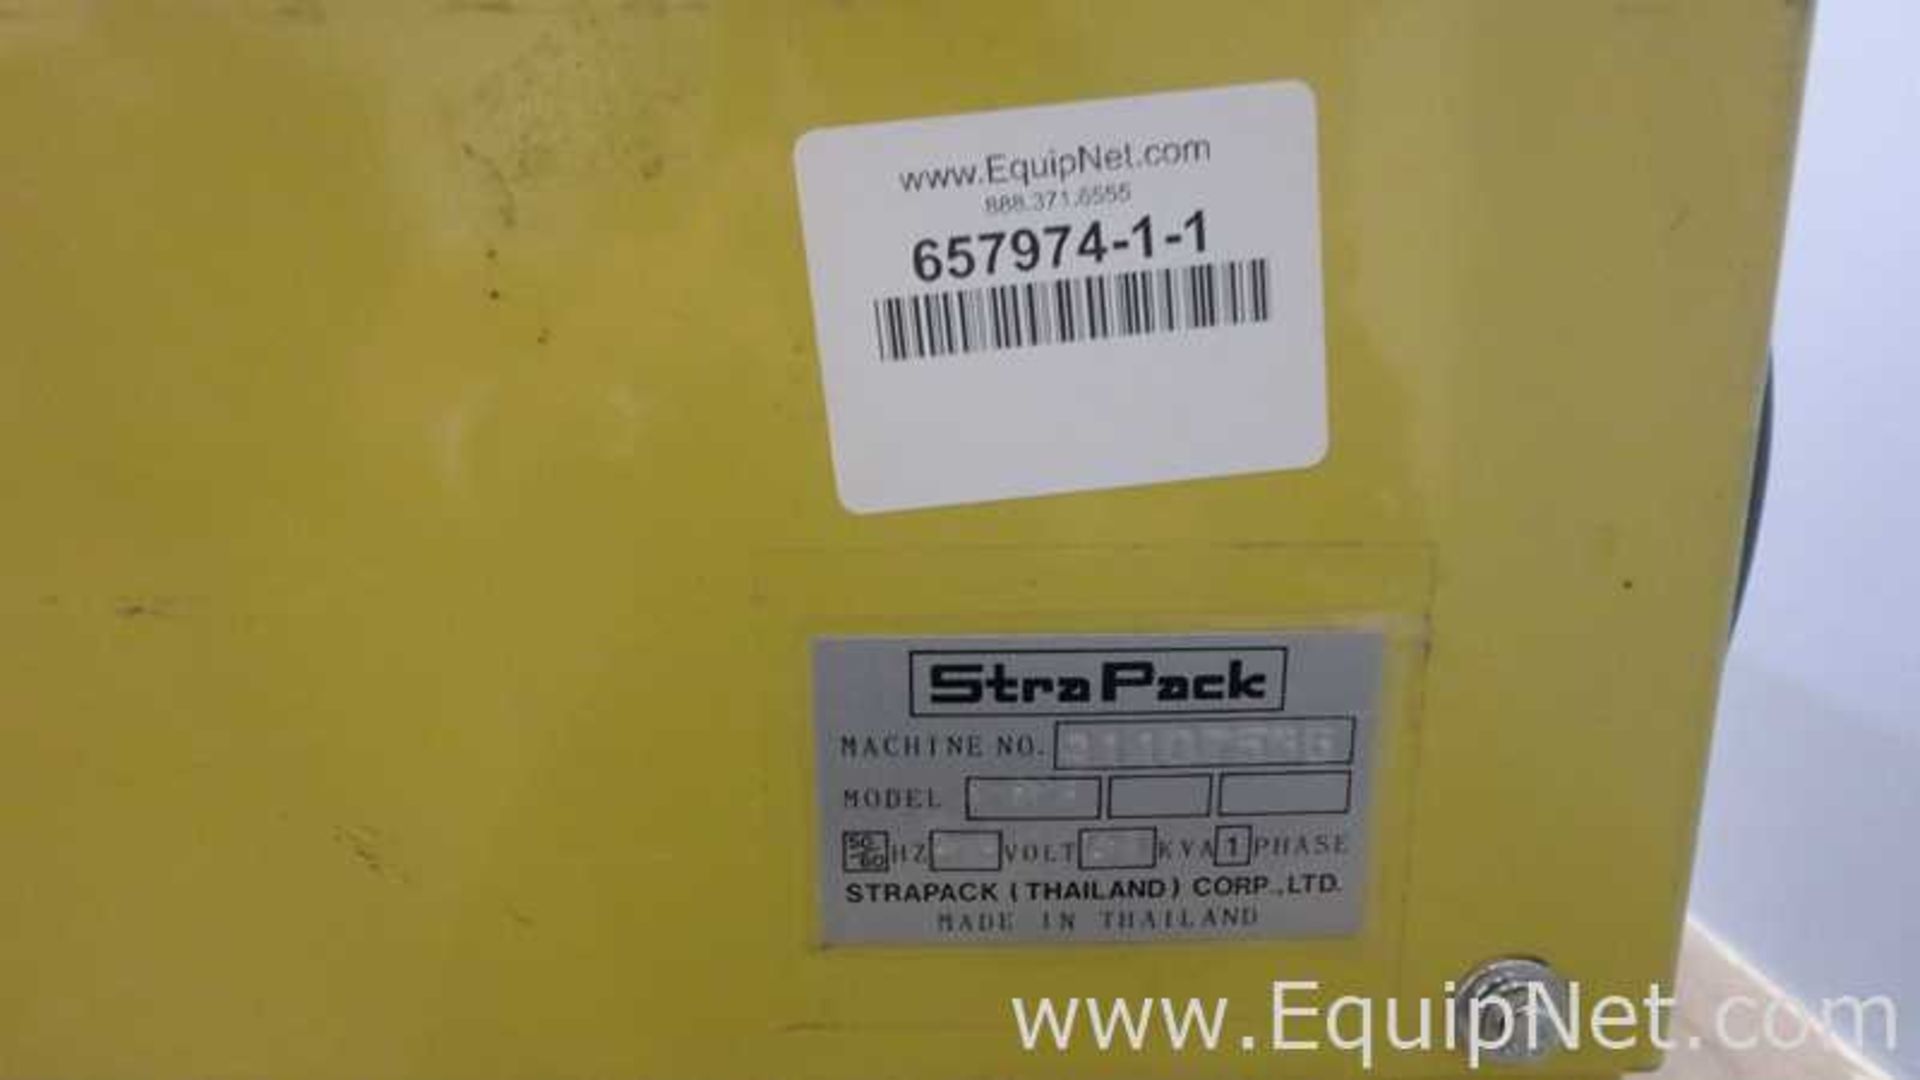 Strapack S-669 Strapping Machine - Image 3 of 6